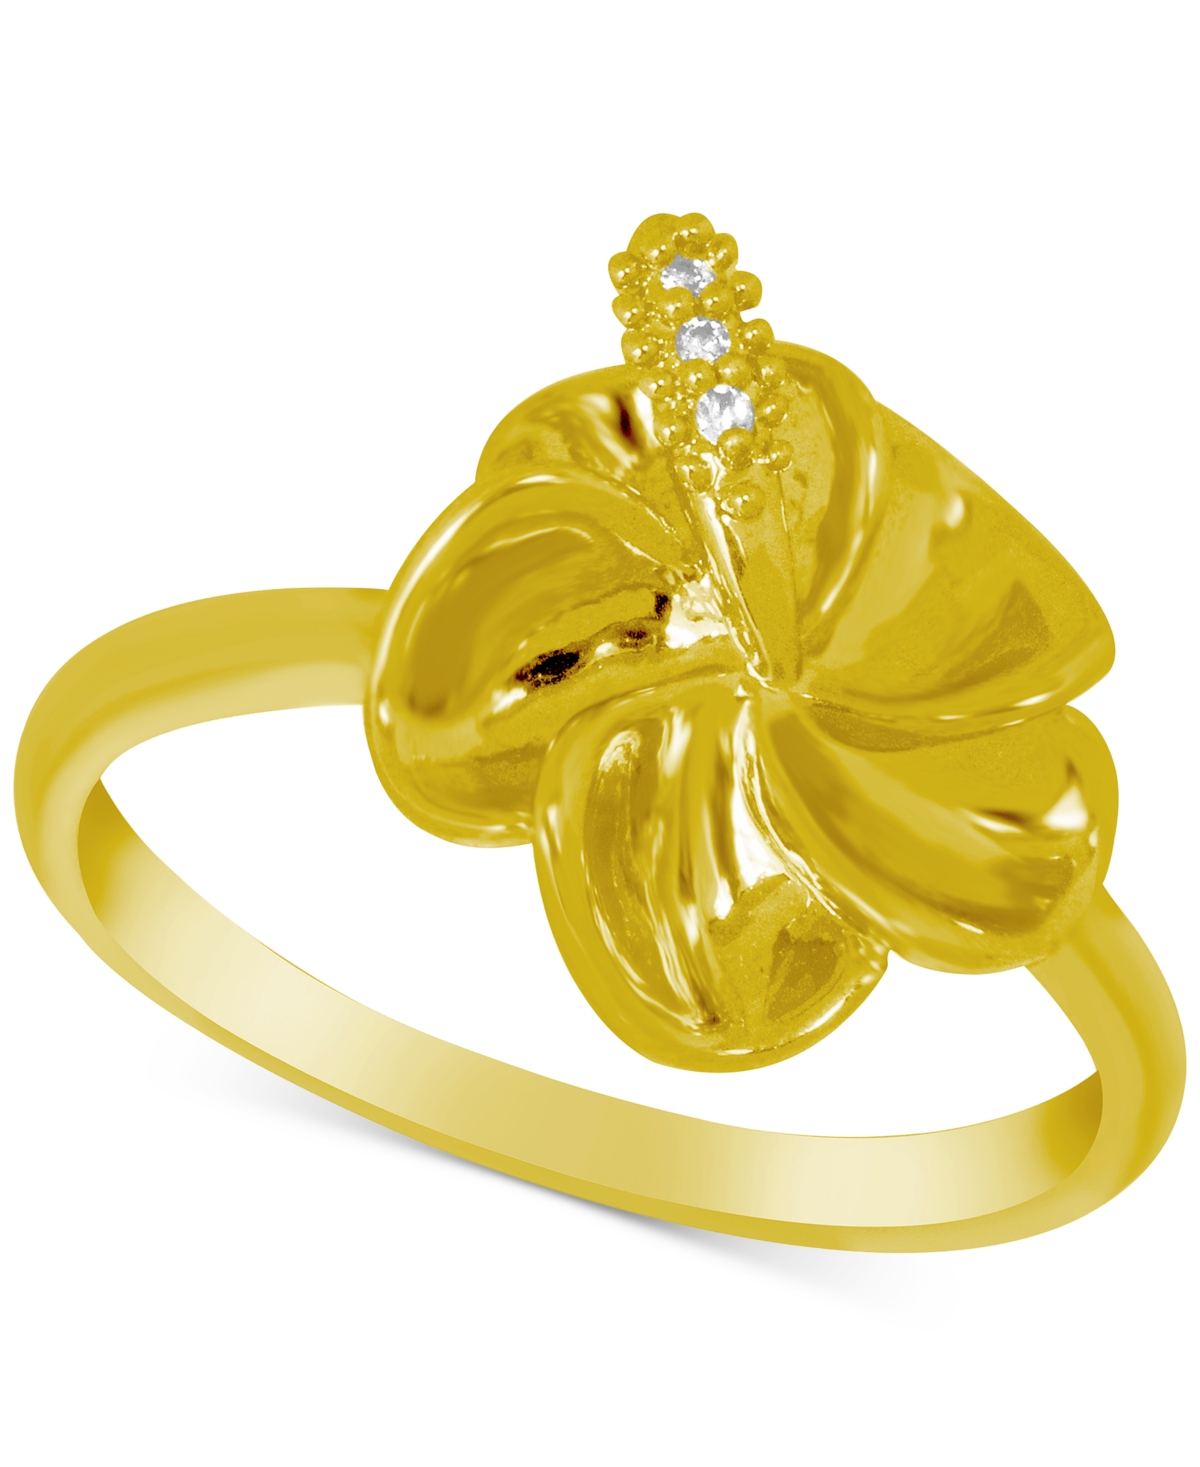 Crystal Accent Flower Ring in Gold-Plate - Gold